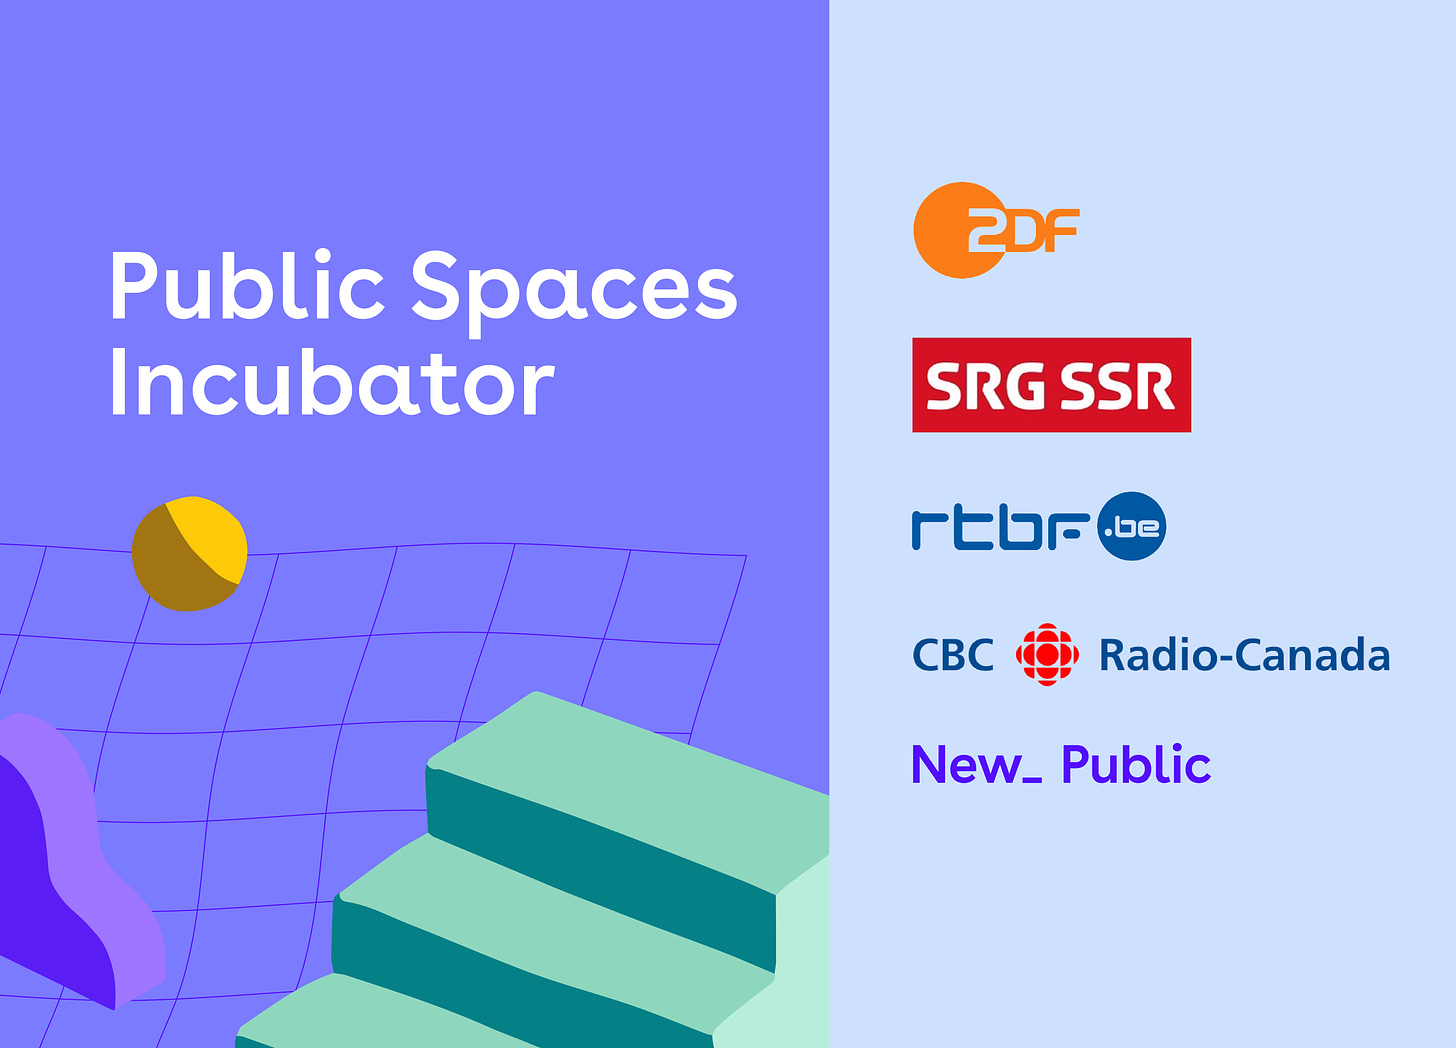 an illustration in puple and blue with abstract shapes on the left, with text "public space incubator" and logos for ZDF, SRG SSR, RTBF, CBC/Radio Canada, and New_ Public.